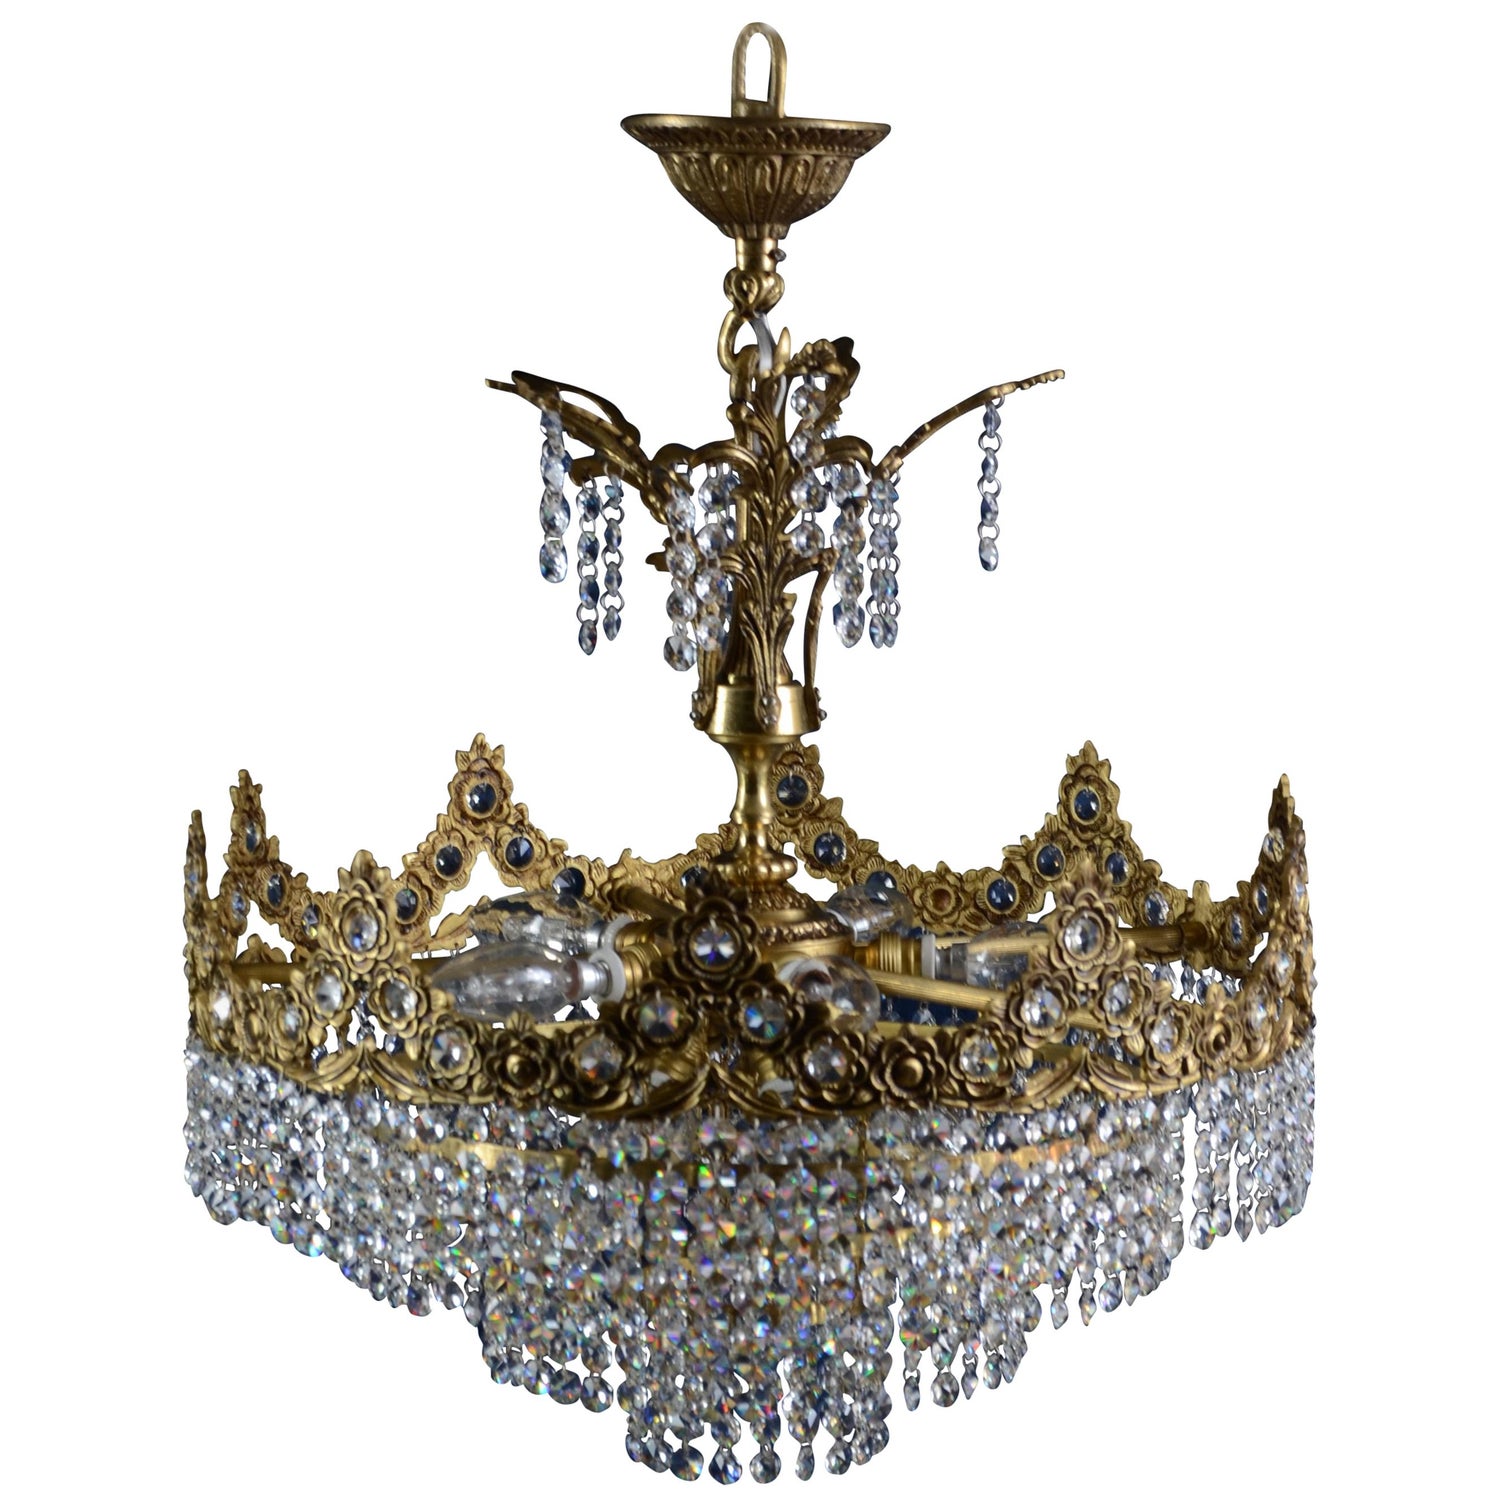 1960s Brass Chandelier with Swarovski Crystals For Sale at 1stDibs